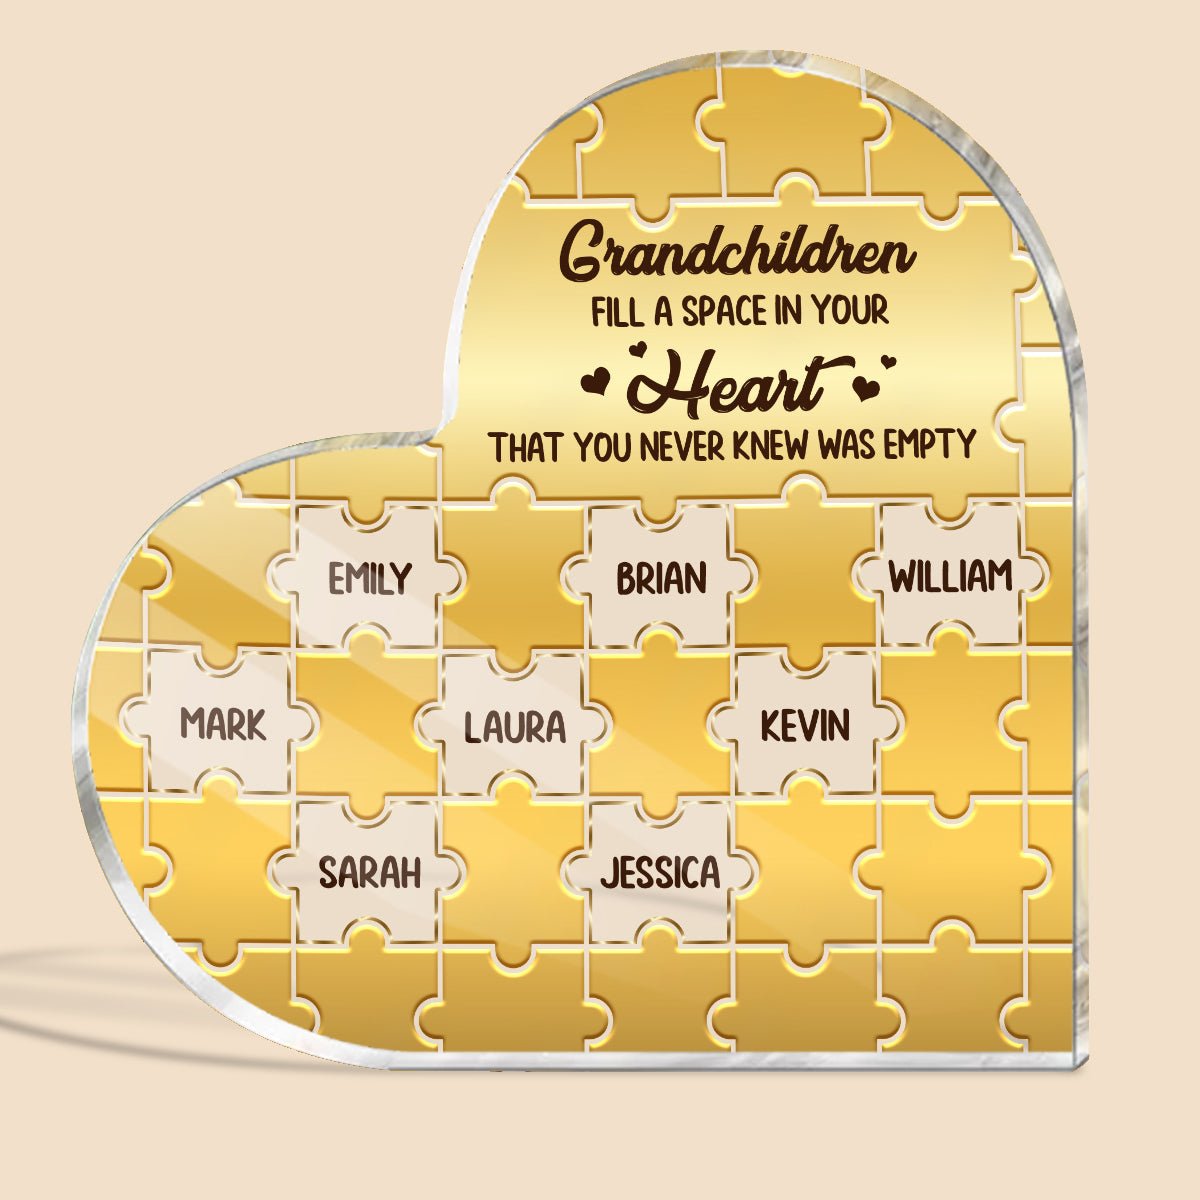 Mother's Puzzle Heart Plaque Fully Customizable, Mother's Day, Father's  Day, Grandparents. READ DESCRIPTION 